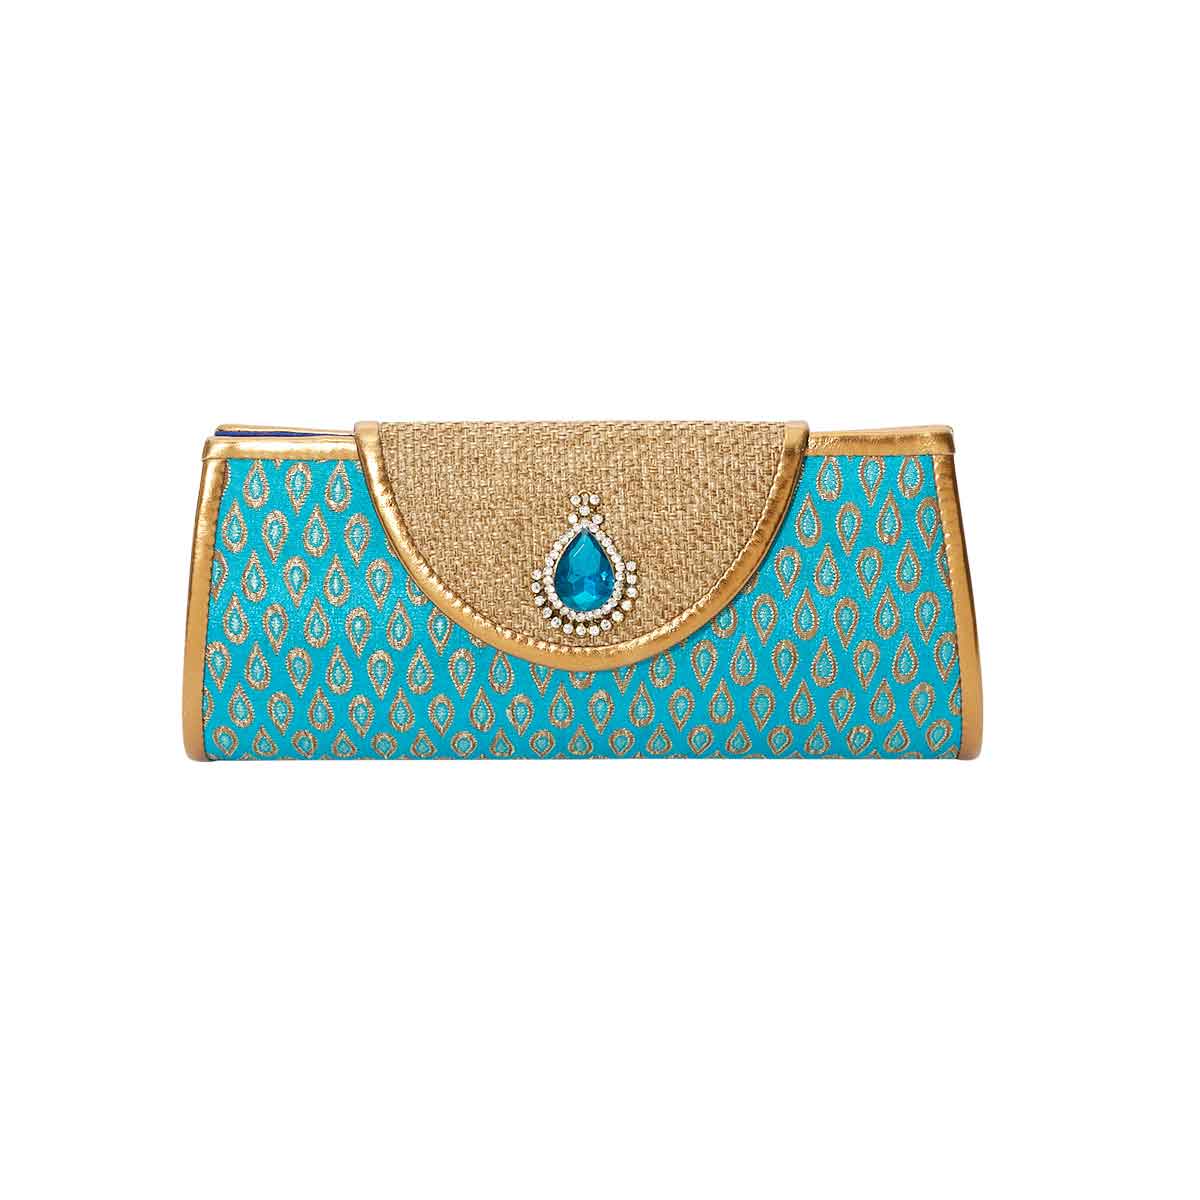 Lakshmi handbag. Turquoise and gold tear drop hand bag with chain strap. Rani Collection by Veronica Tharmalingam. Front view